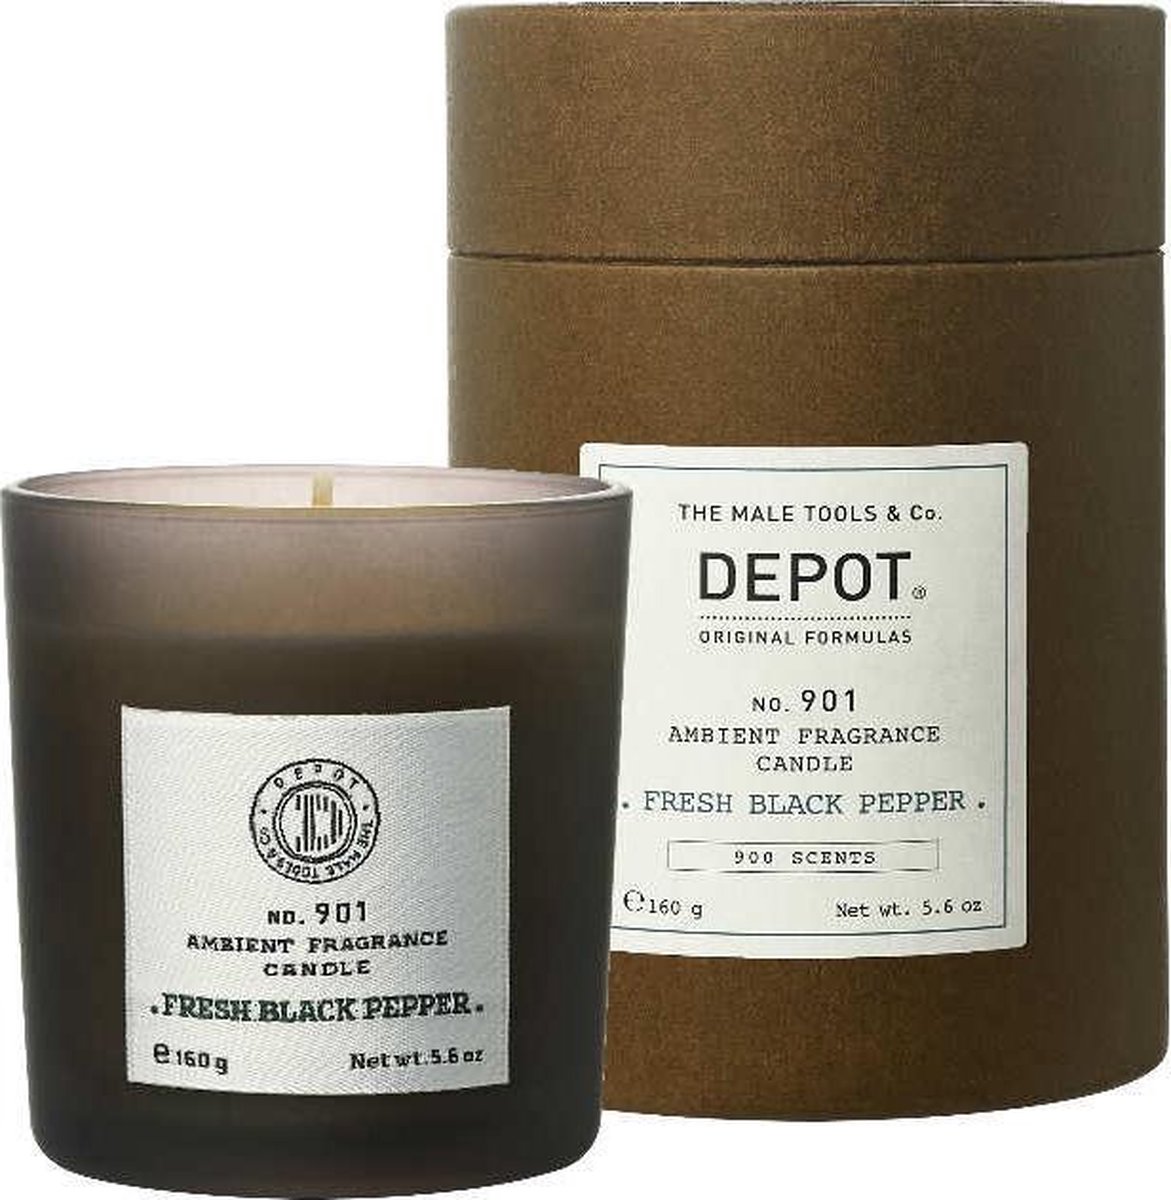 Depot 901 ambient fragrance candle fresh black pepper 160ml